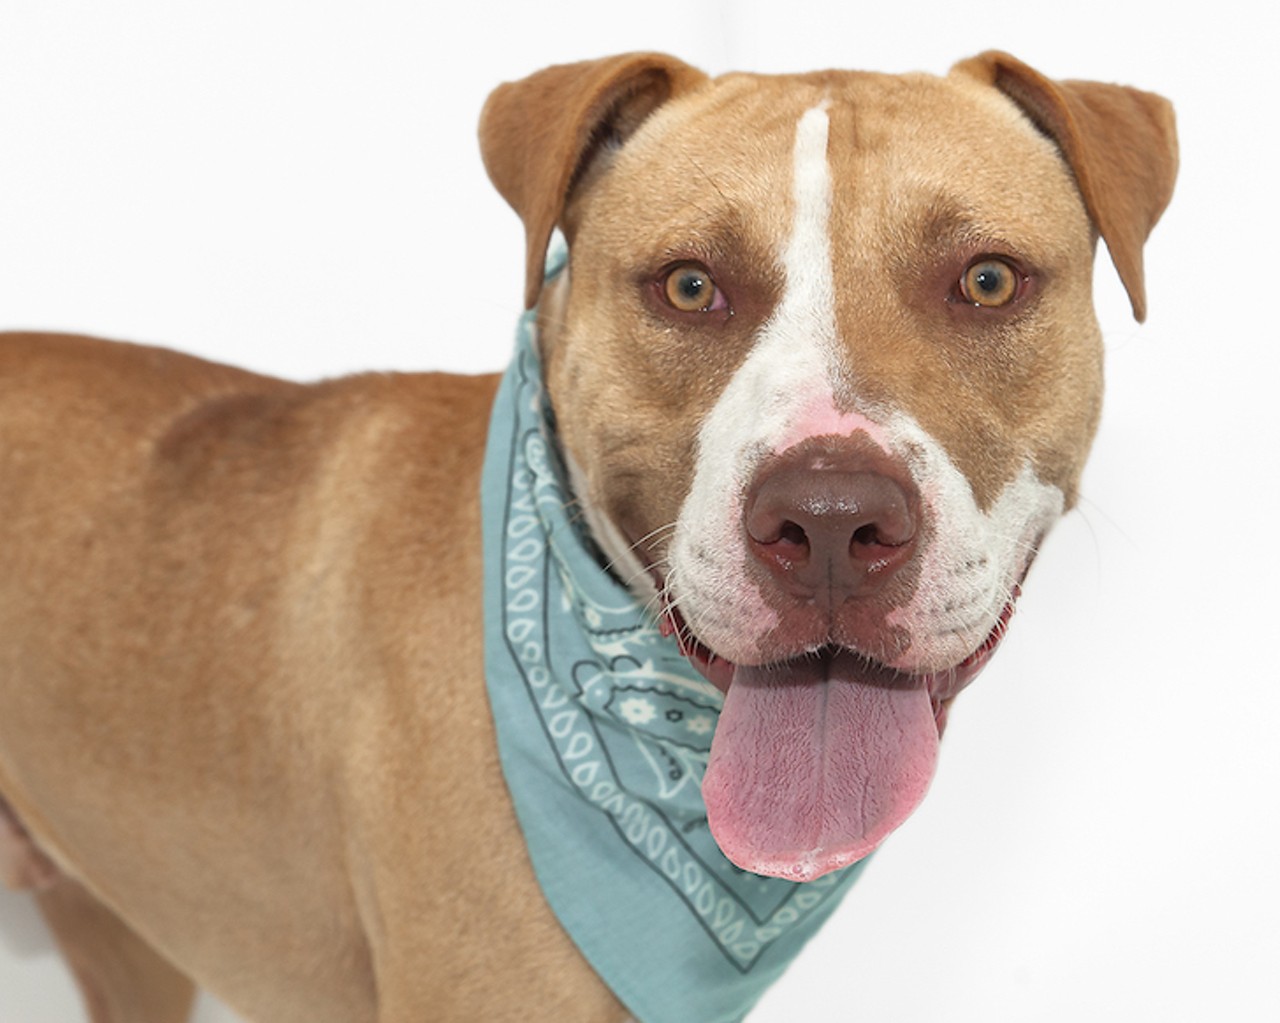 16 adoptable dogs in Orlando any mom would love